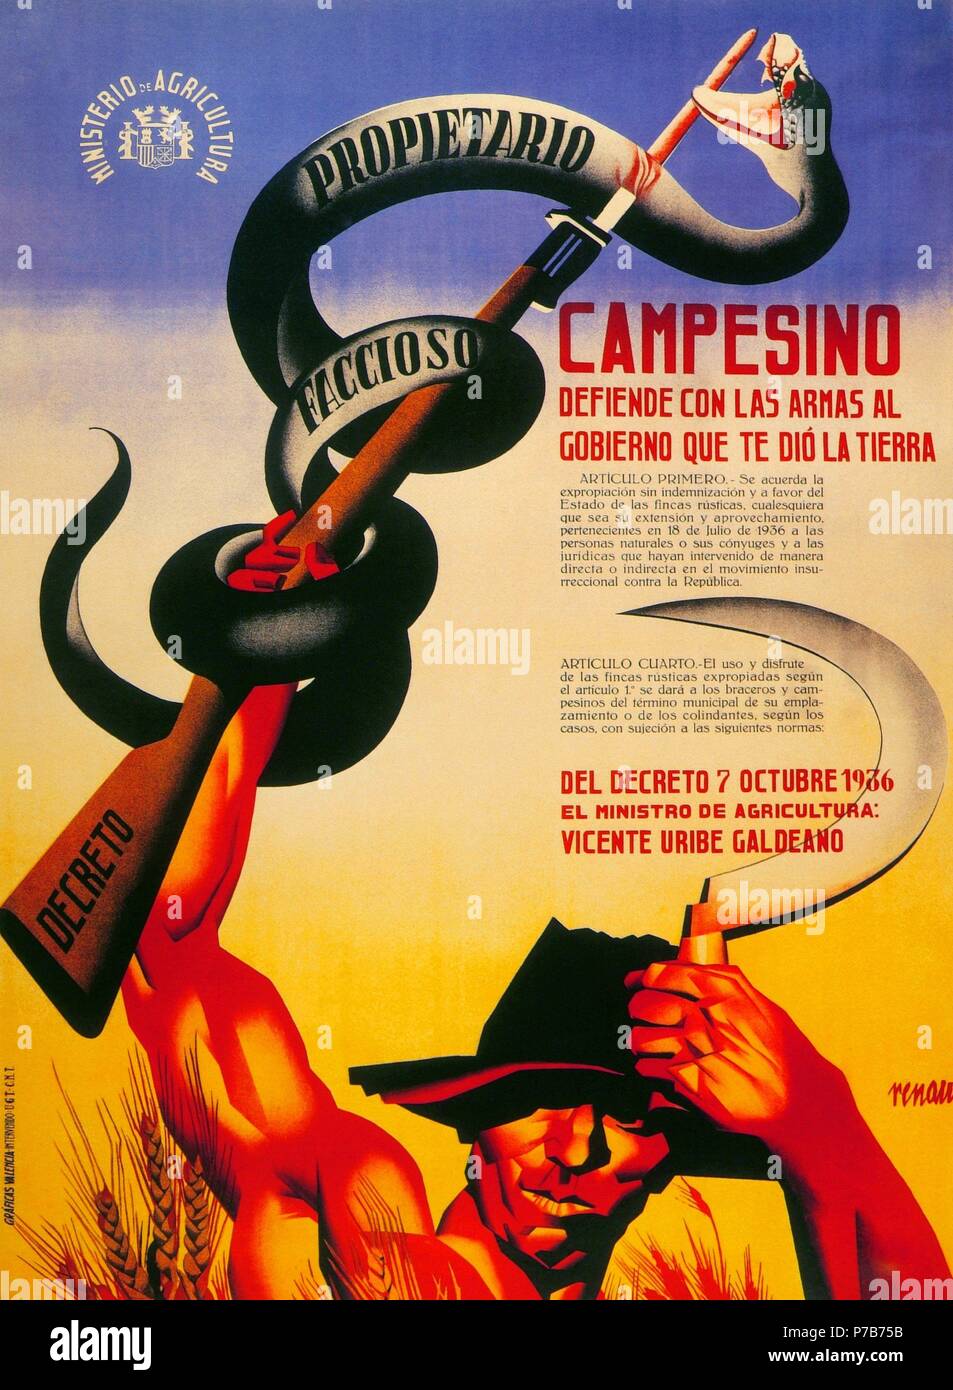 Spanish Civil War (1936-1939). Poster with the phrase Peasant, defend with arms the government that gave you the land. Edited by the Ministry of Agriculture during the republican government of Francisco Largo Caballero and with Vicente Uribe as Minister of Agriculture. Year 1936. Poster by Jose Renau (1907-1982). Stock Photo